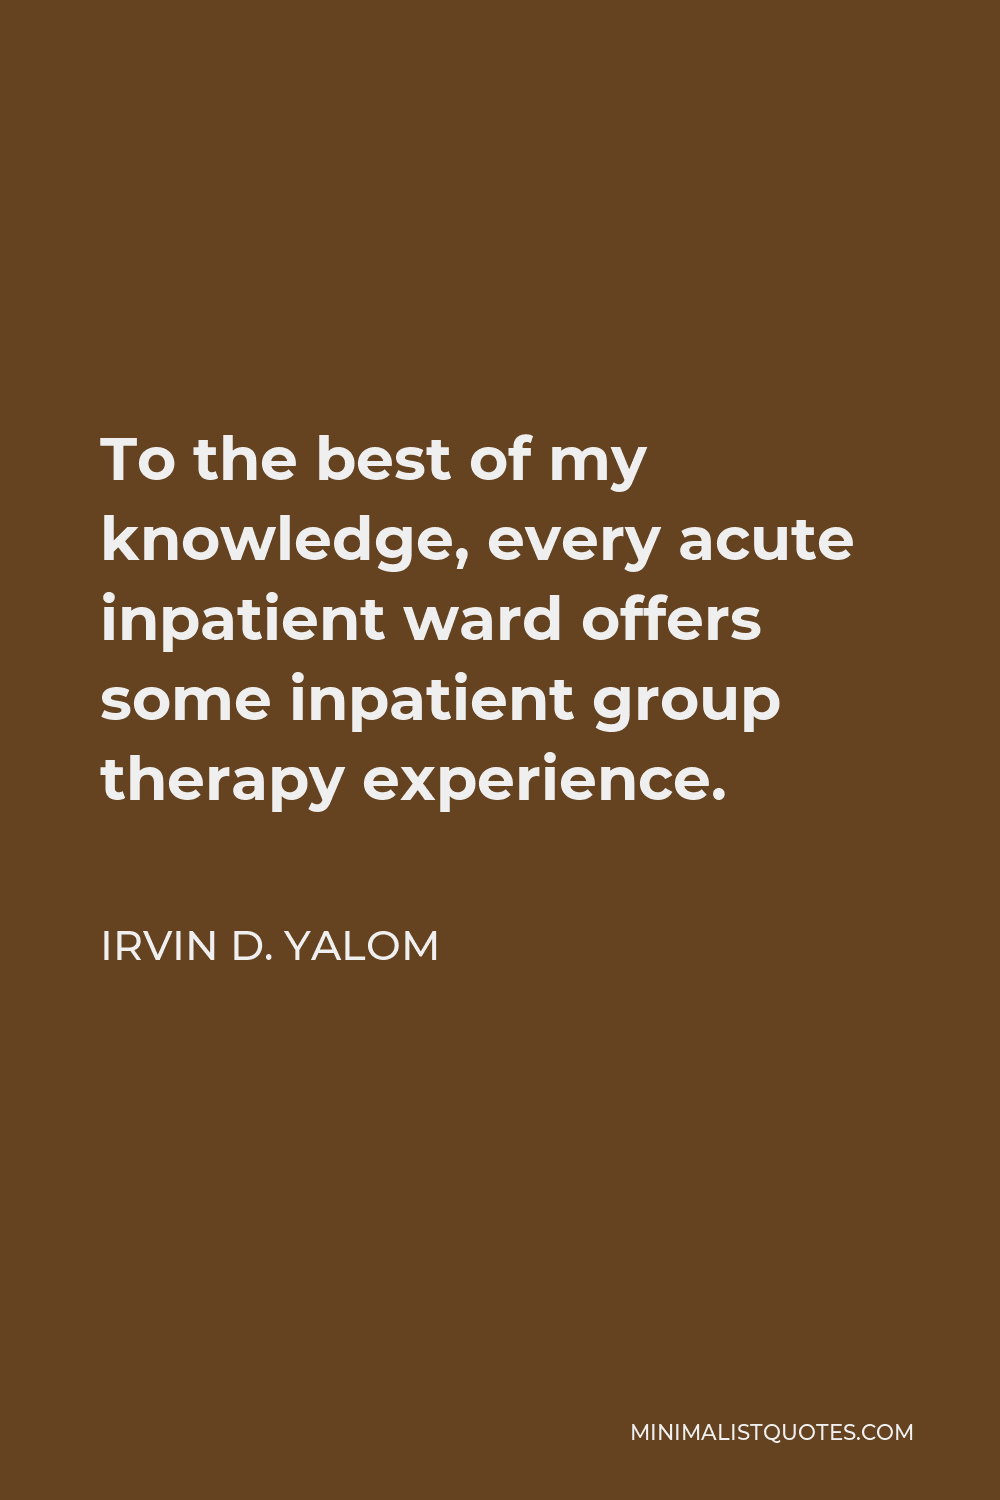 Irvin D. Yalom Quote - To the best of my knowledge, every acute inpatient ward offers some inpatient group therapy experience.